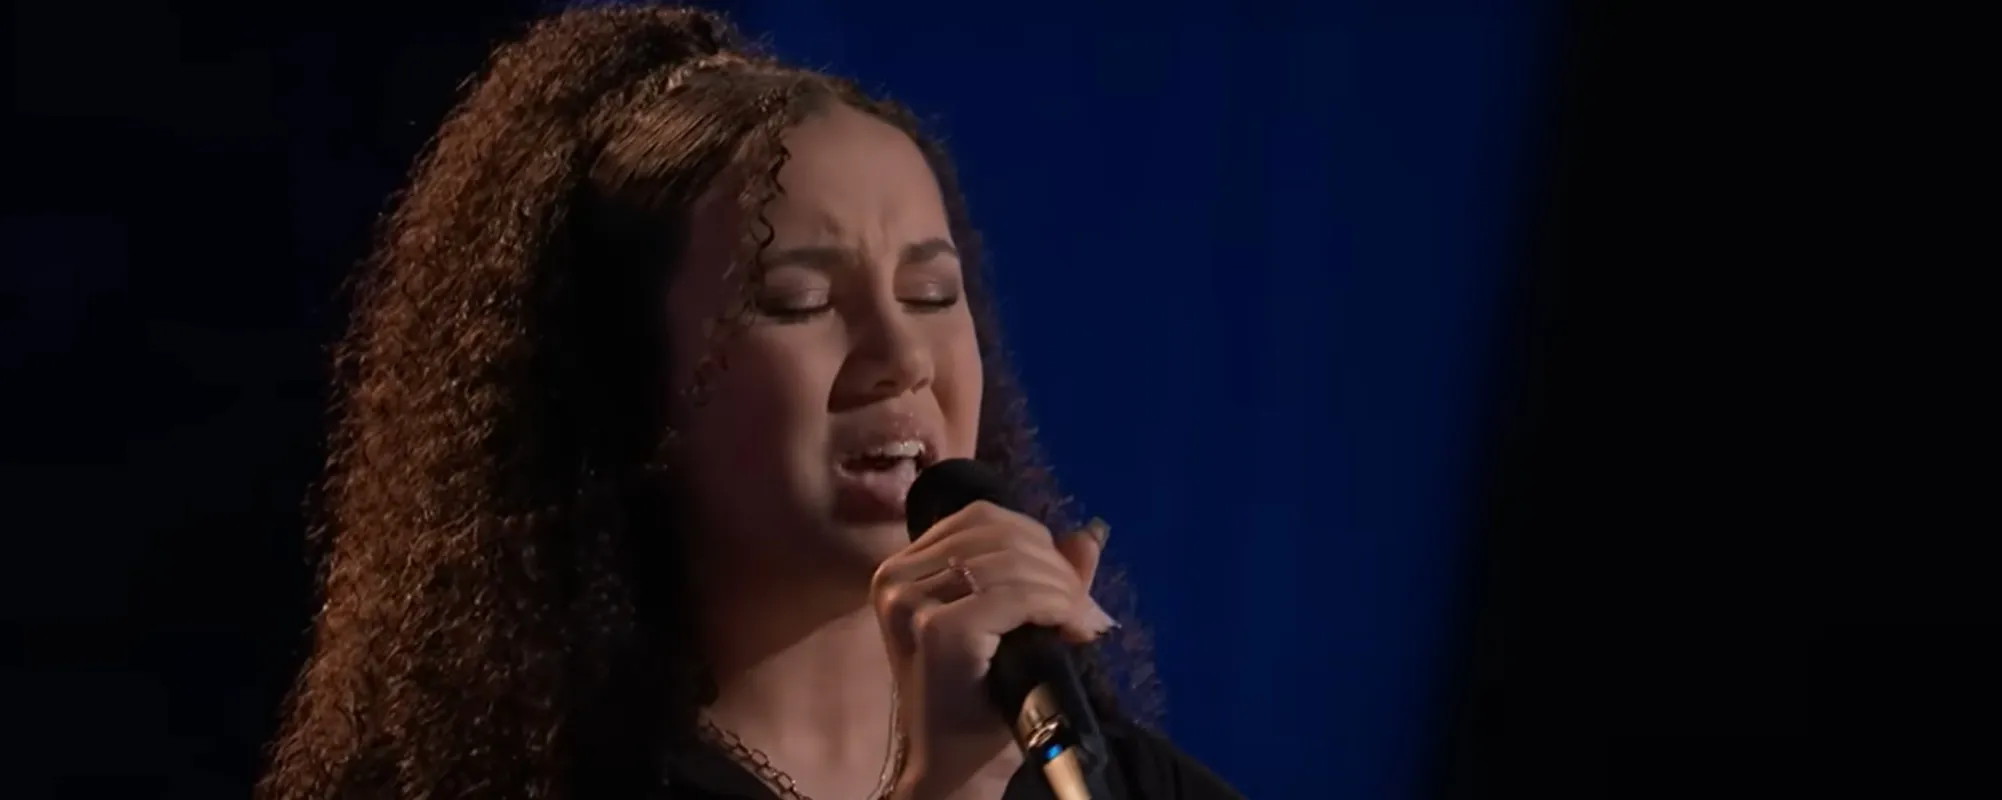 3 Quick Facts About ‘The Voice’ 16-Year-Old Phenom Serenity Arce